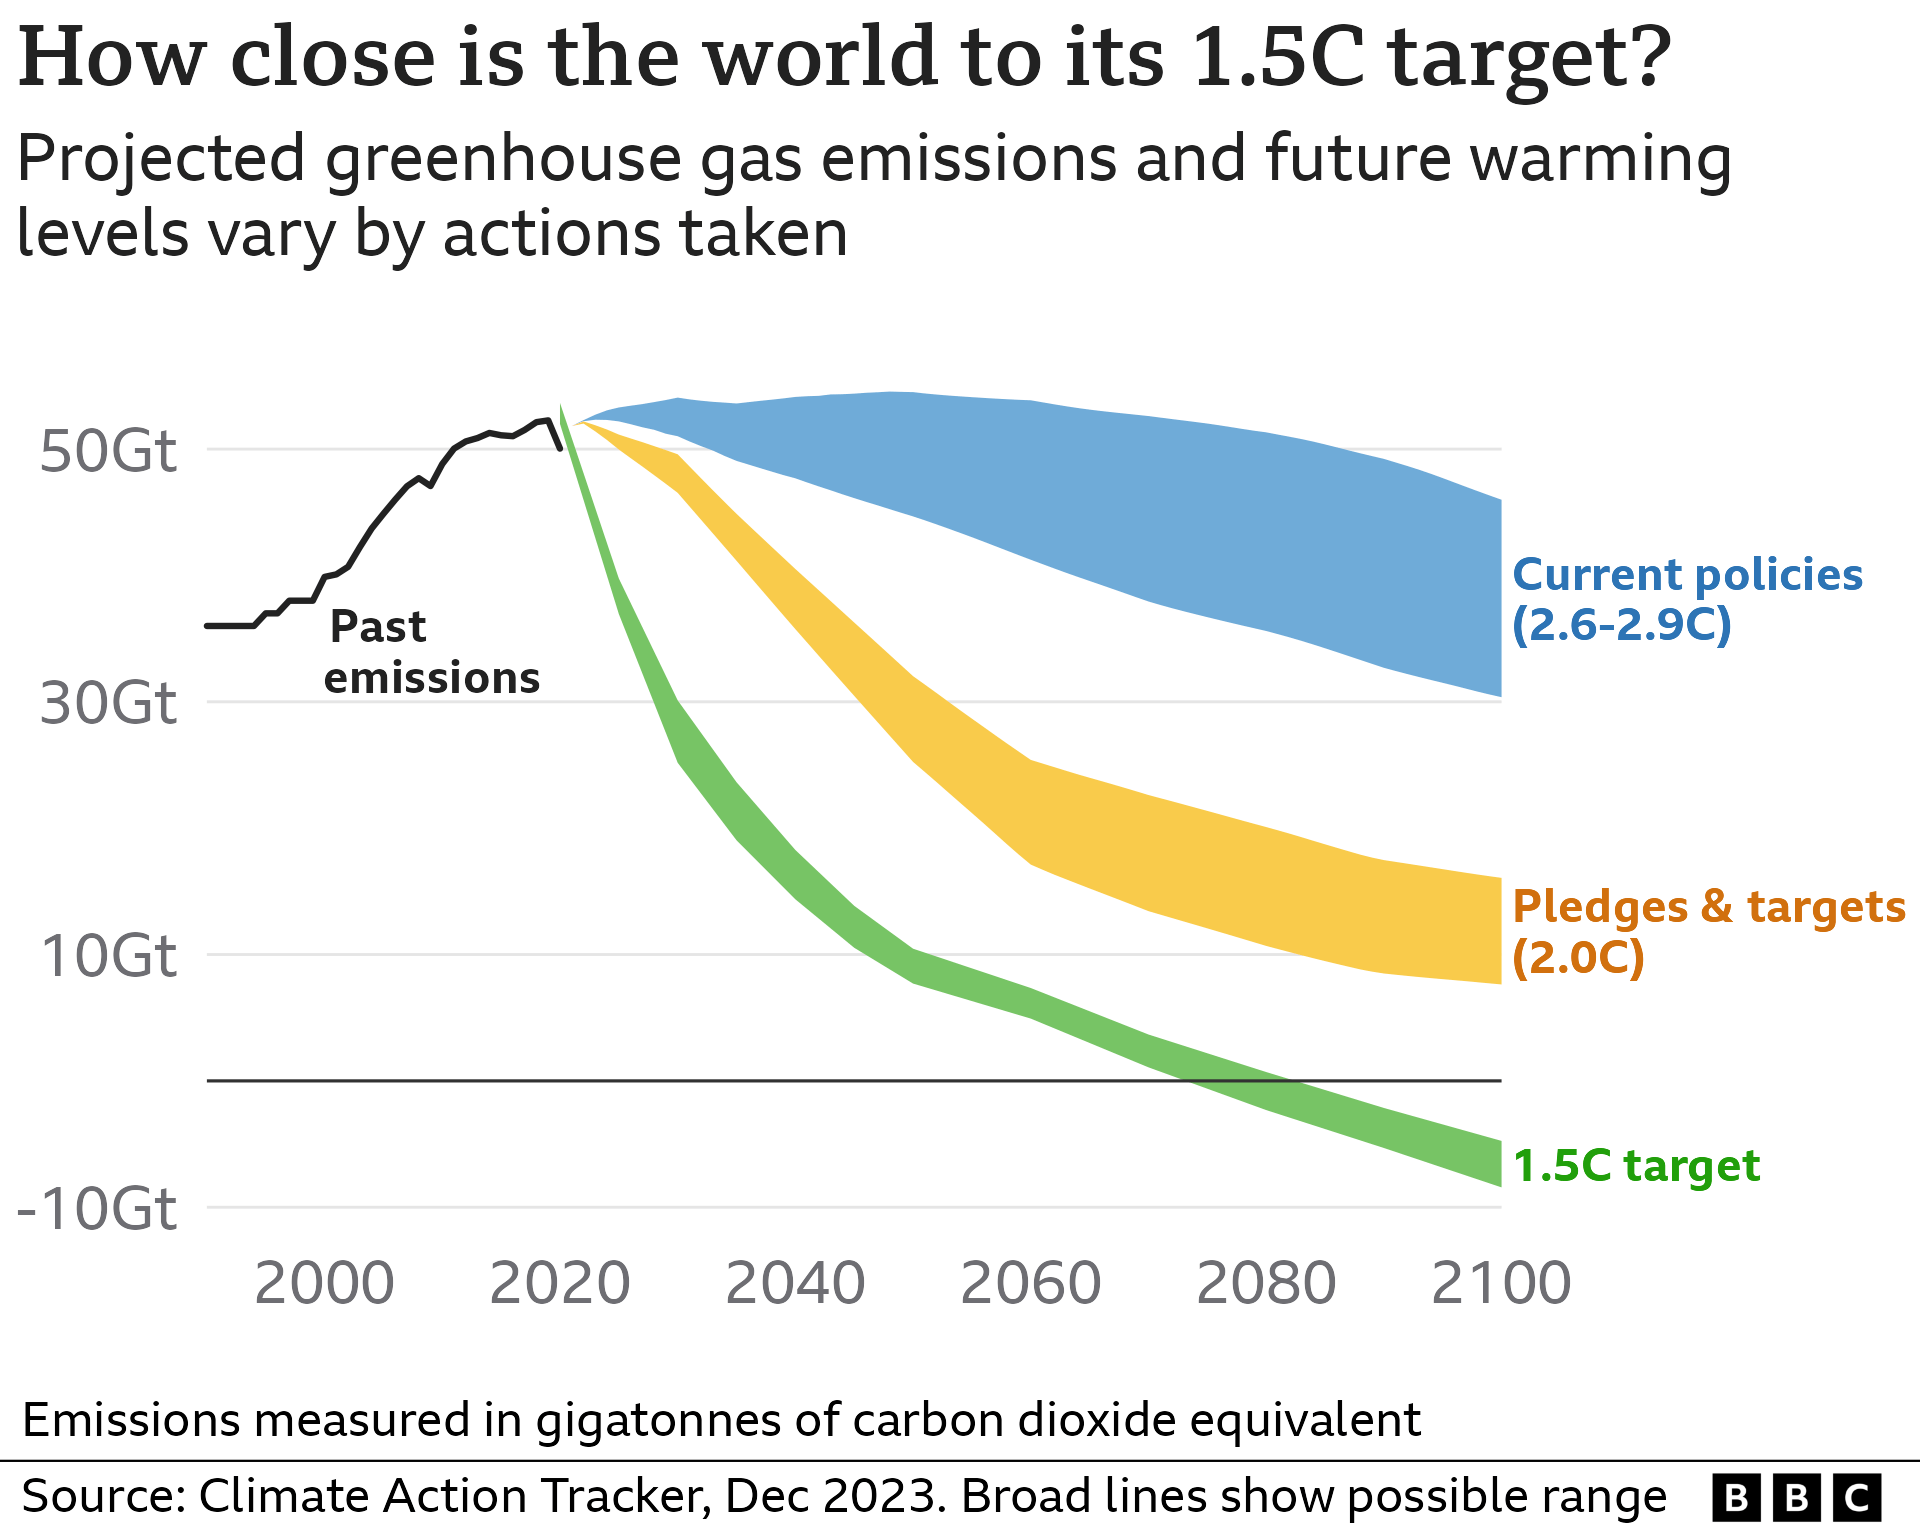 Line chart showing three different projected pathways for global emissions and their respective levels of warming by the year 2100. If current policies are pursued, the world could still see 2.6-2.9 degrees warming; if all pledges and targets are met, 2.0 degrees of warming. But in order to reach the target of 1.5C or less, global annual emissions need to sharply decrease beyond either set of actions.